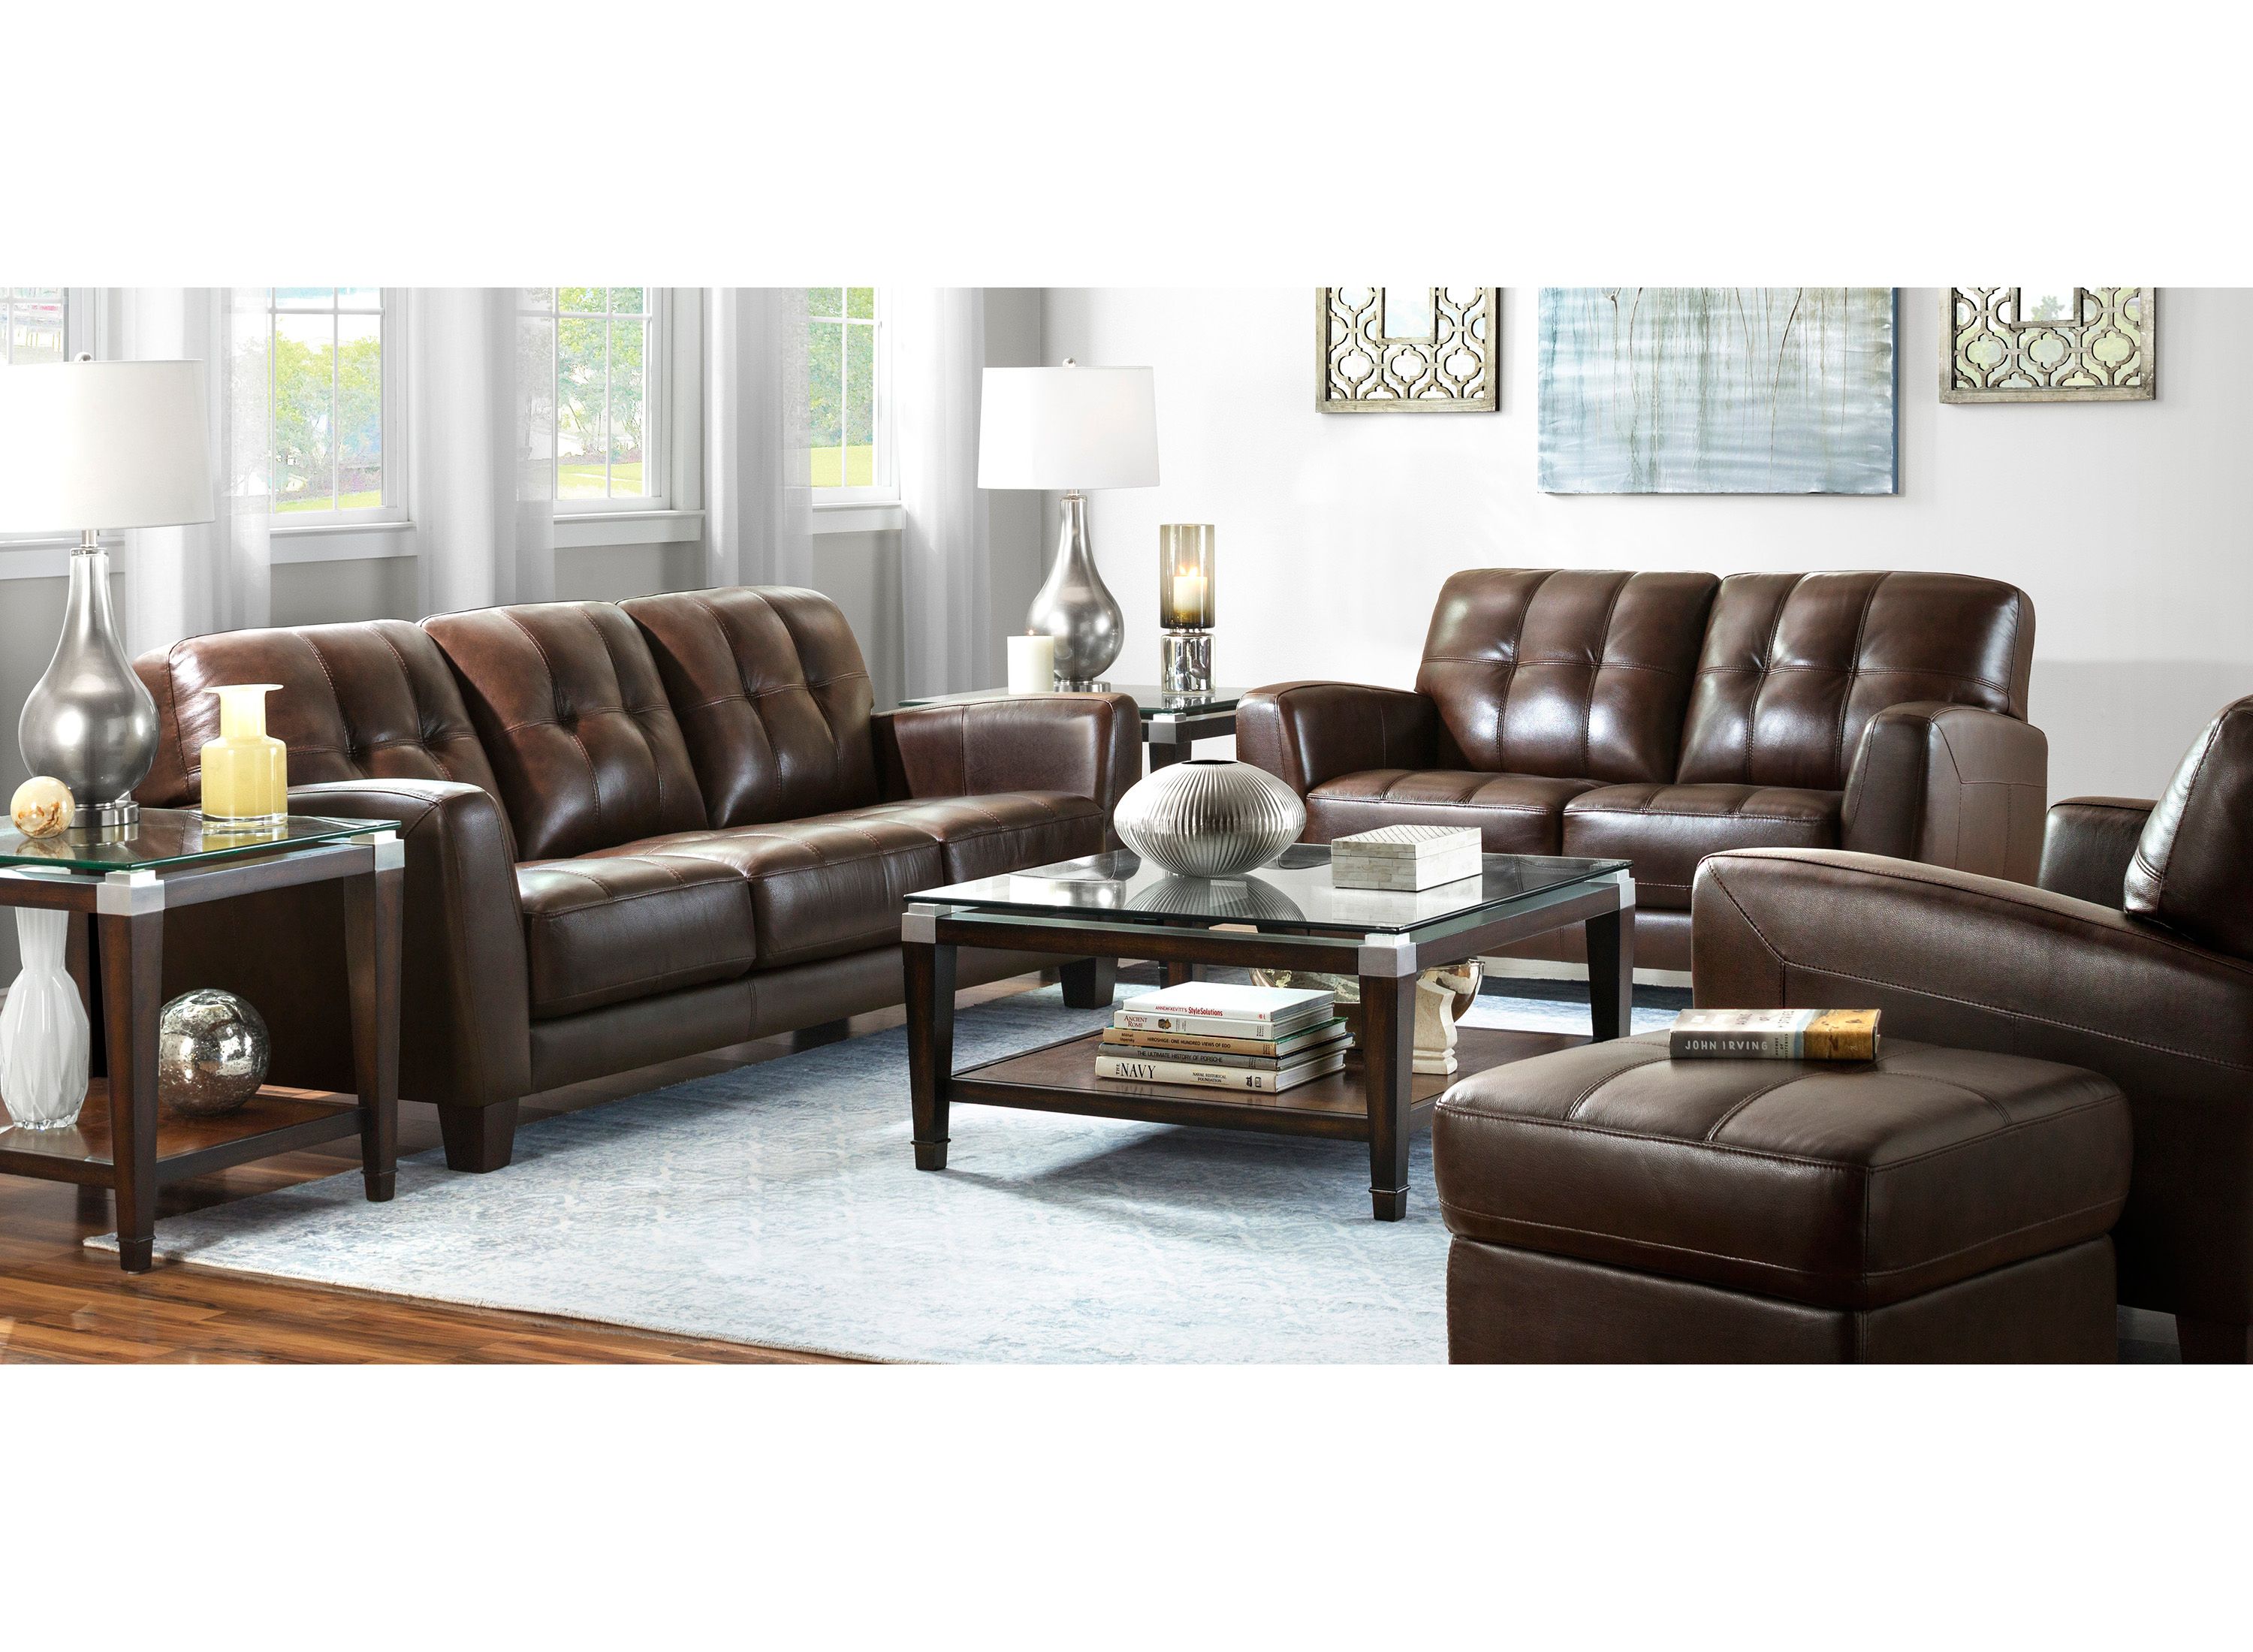 Gino 2 Pc Leather Sofa And Loveseat